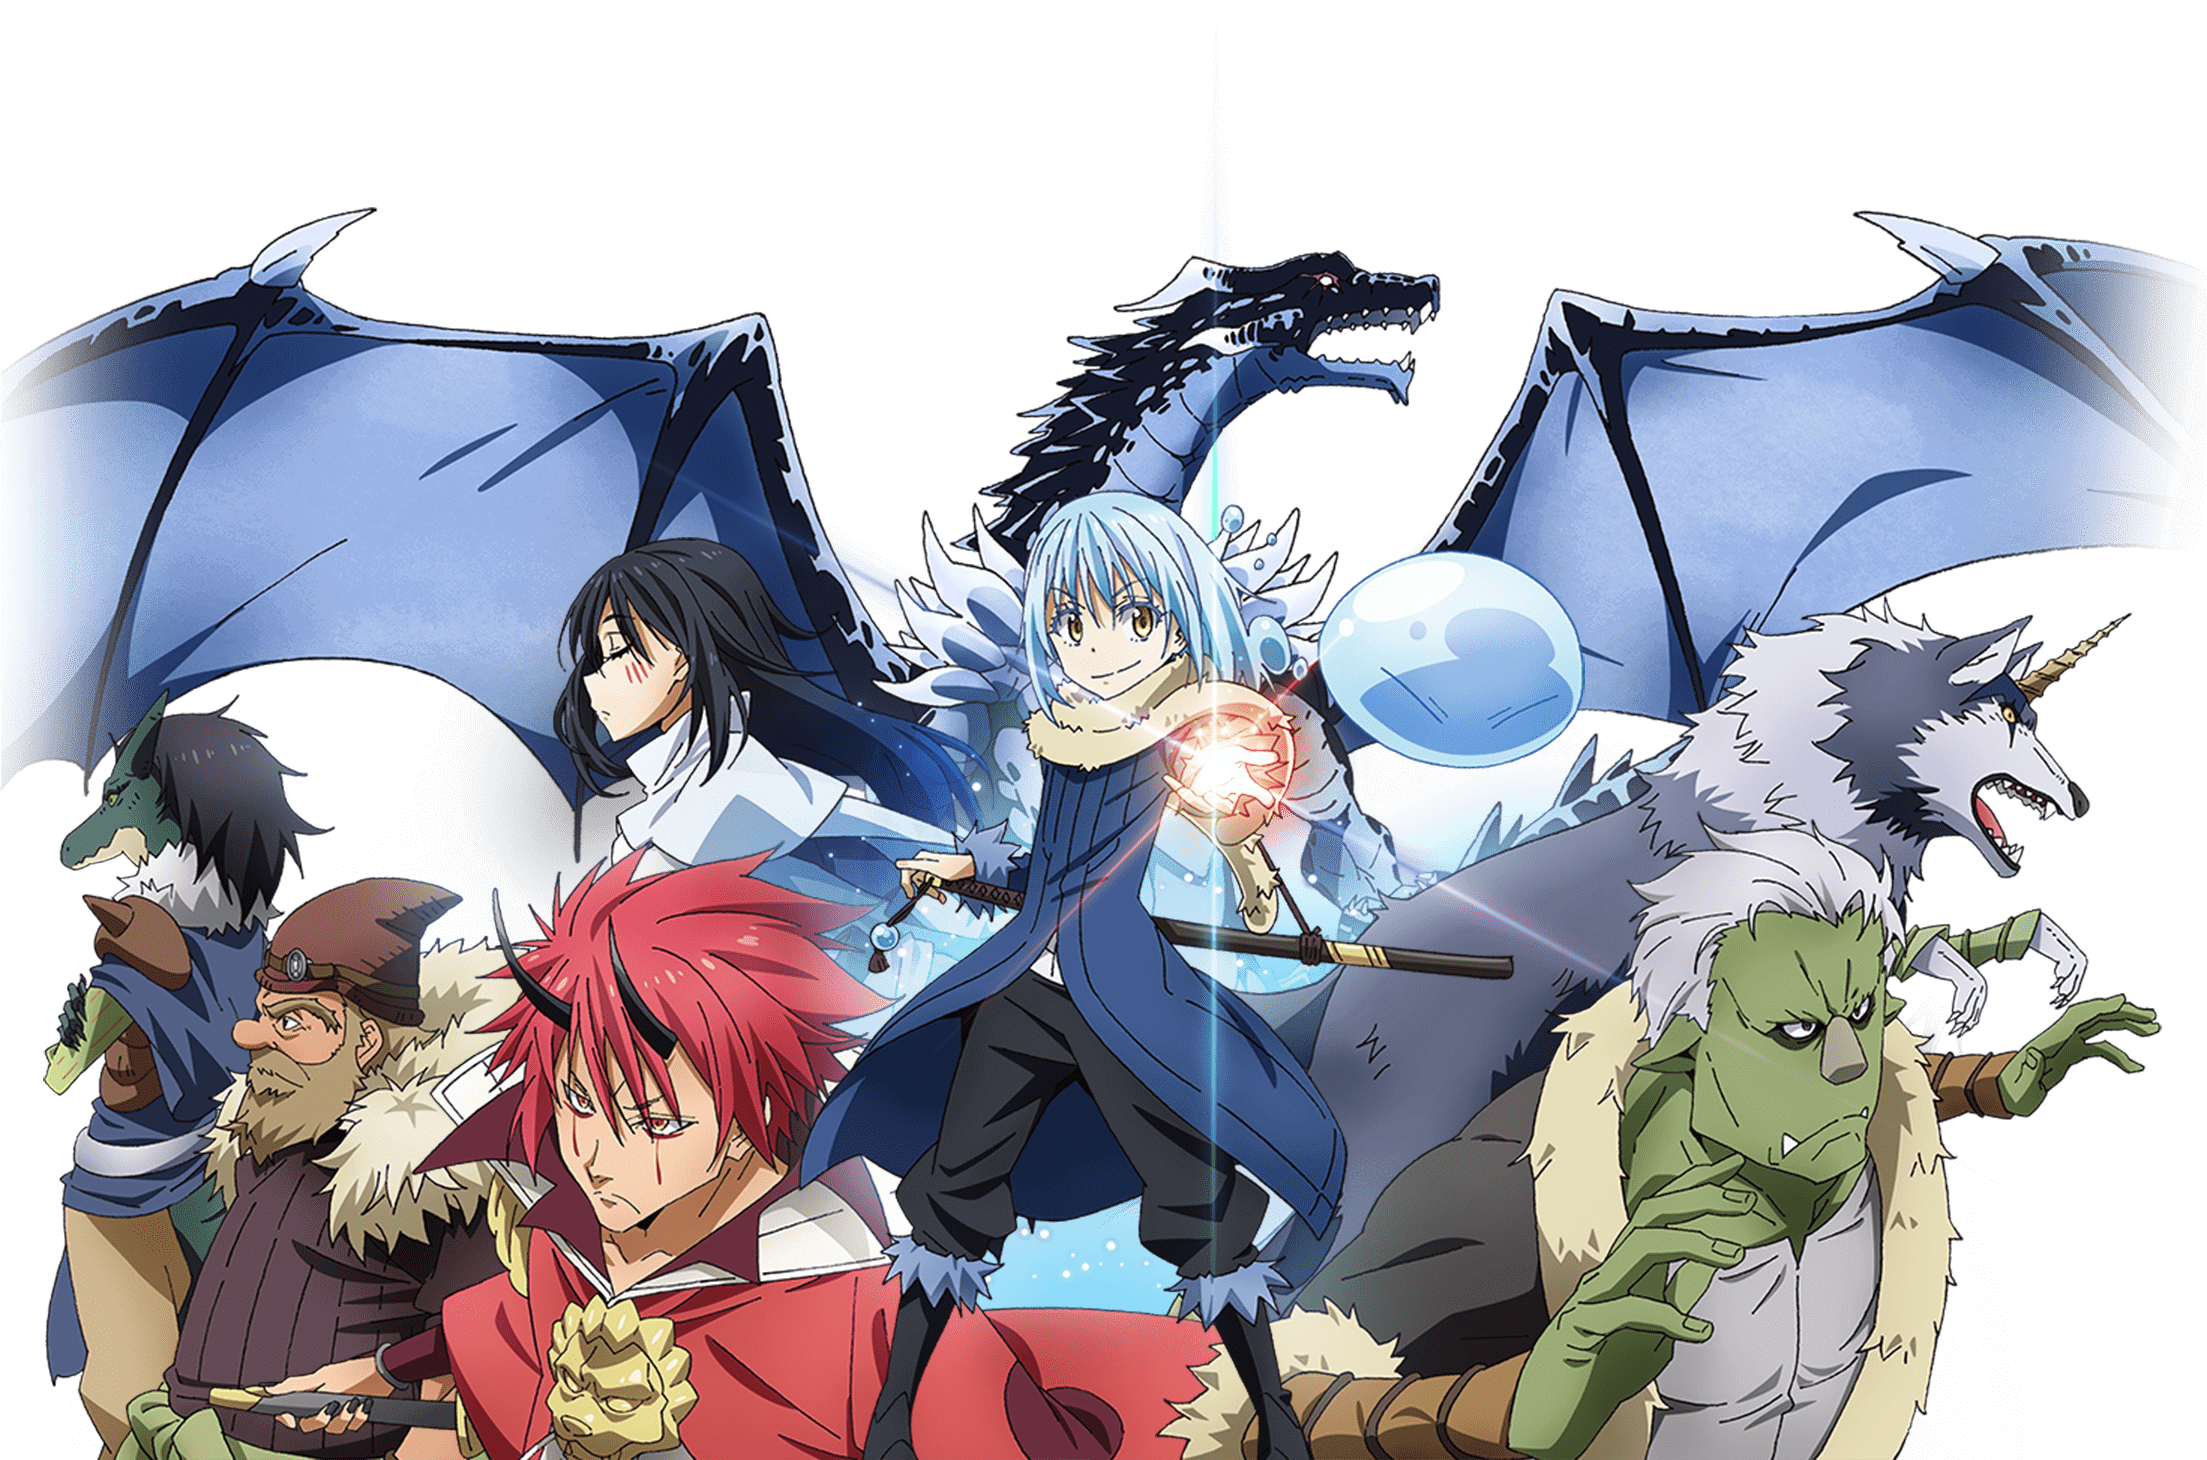 Anime That Time I Got Reincarnated as a Slime HD Wallpaper | Background Image